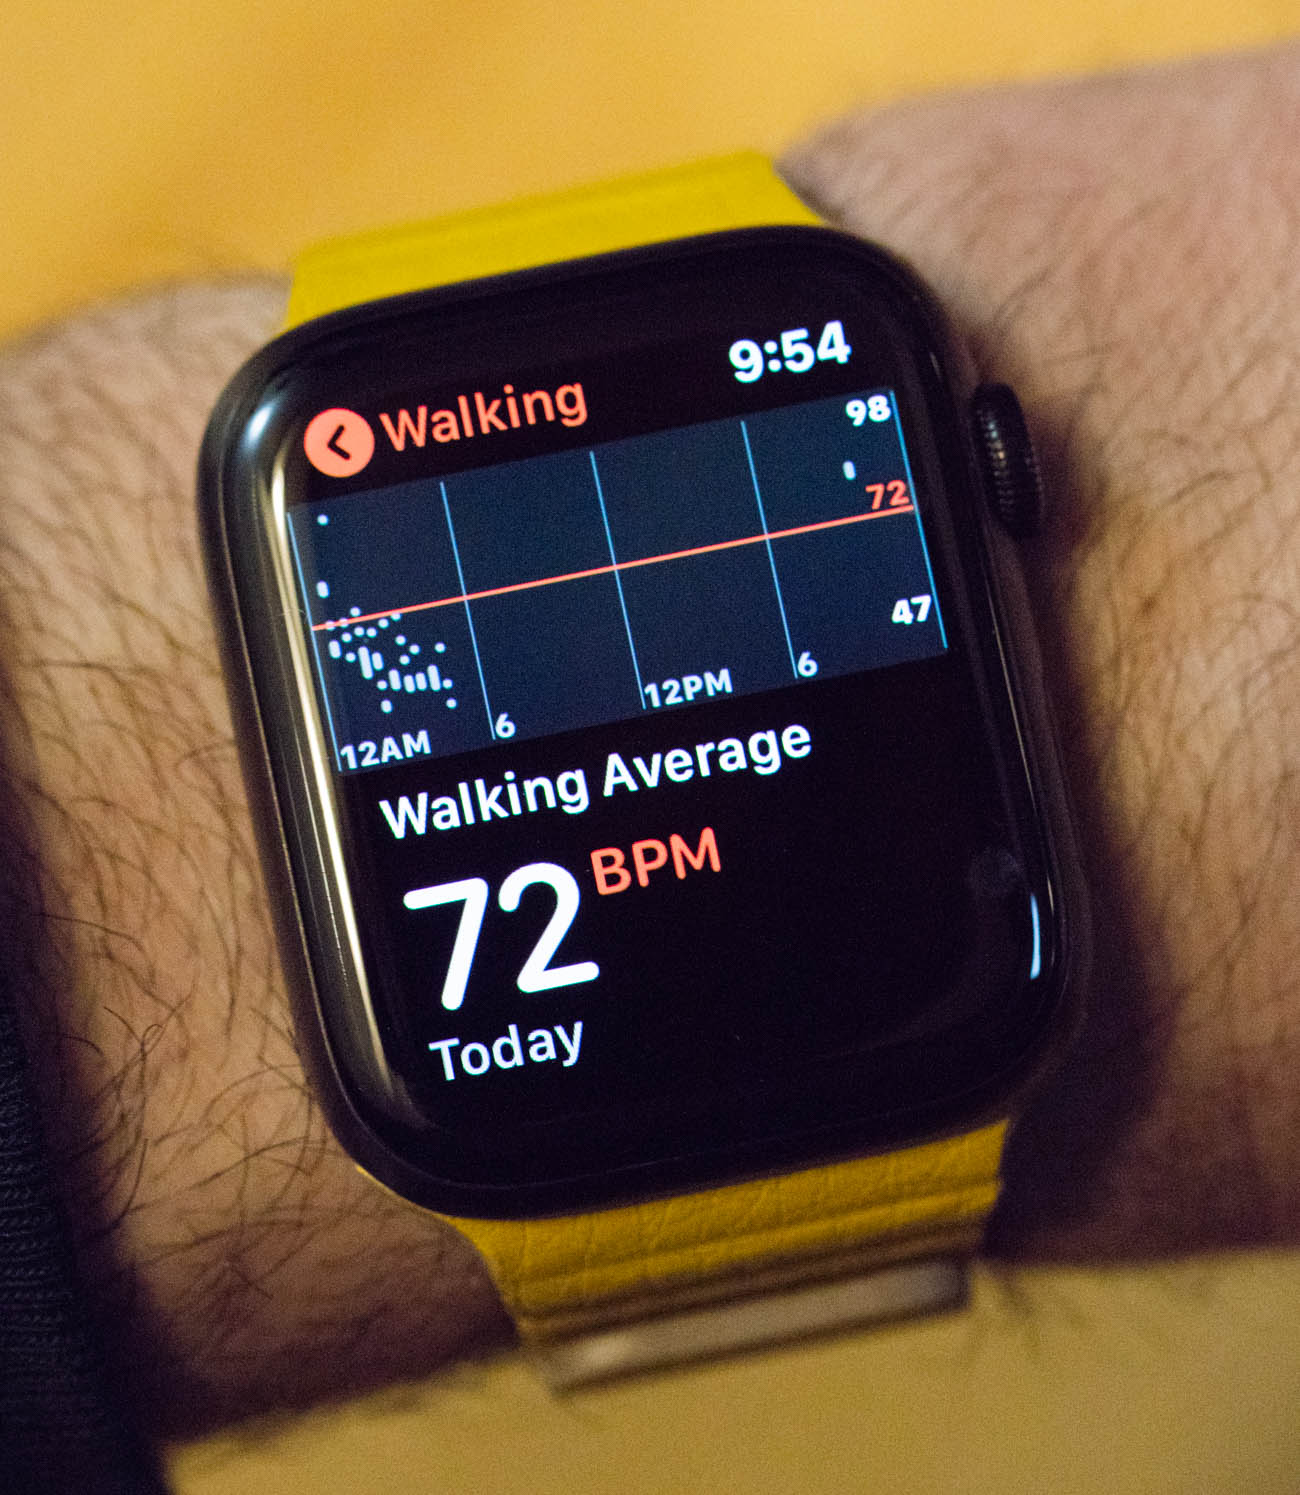 Apple Watch Series 5 Displays Information I Most Appreciate On My Wrist Featured Articles 